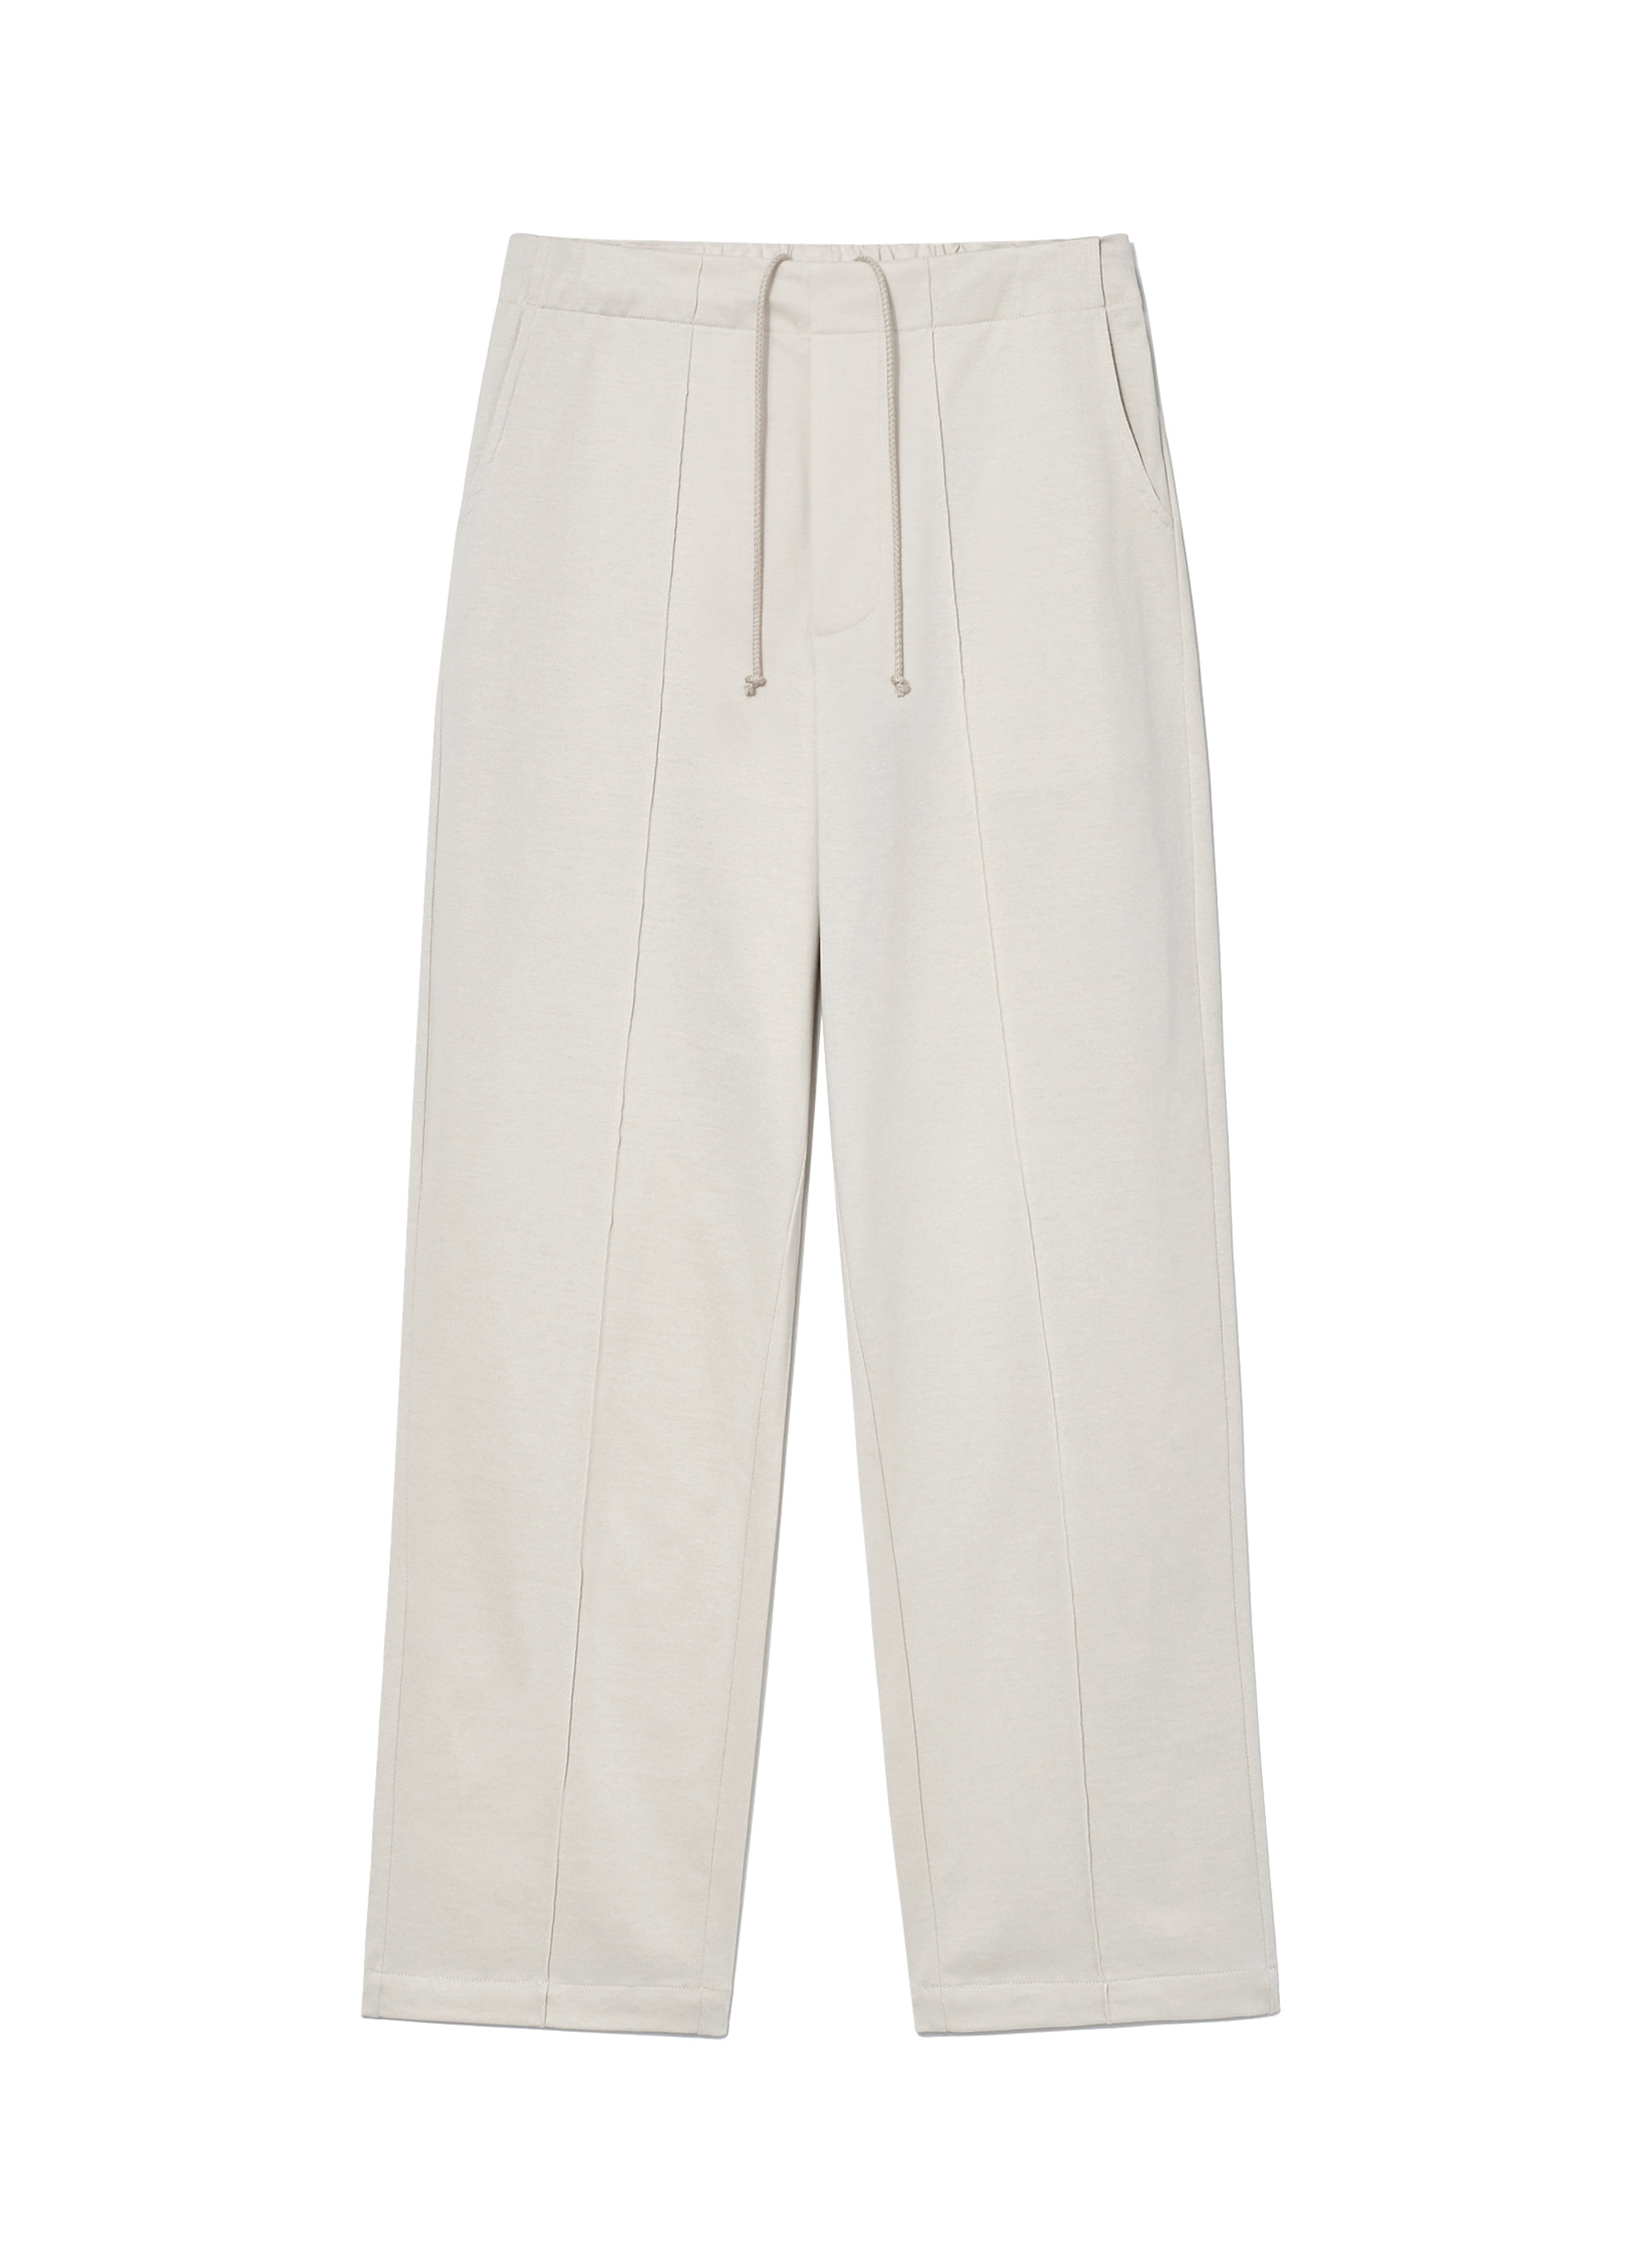 090 PIN TUCK JERSEY BAND PANT BEIGE